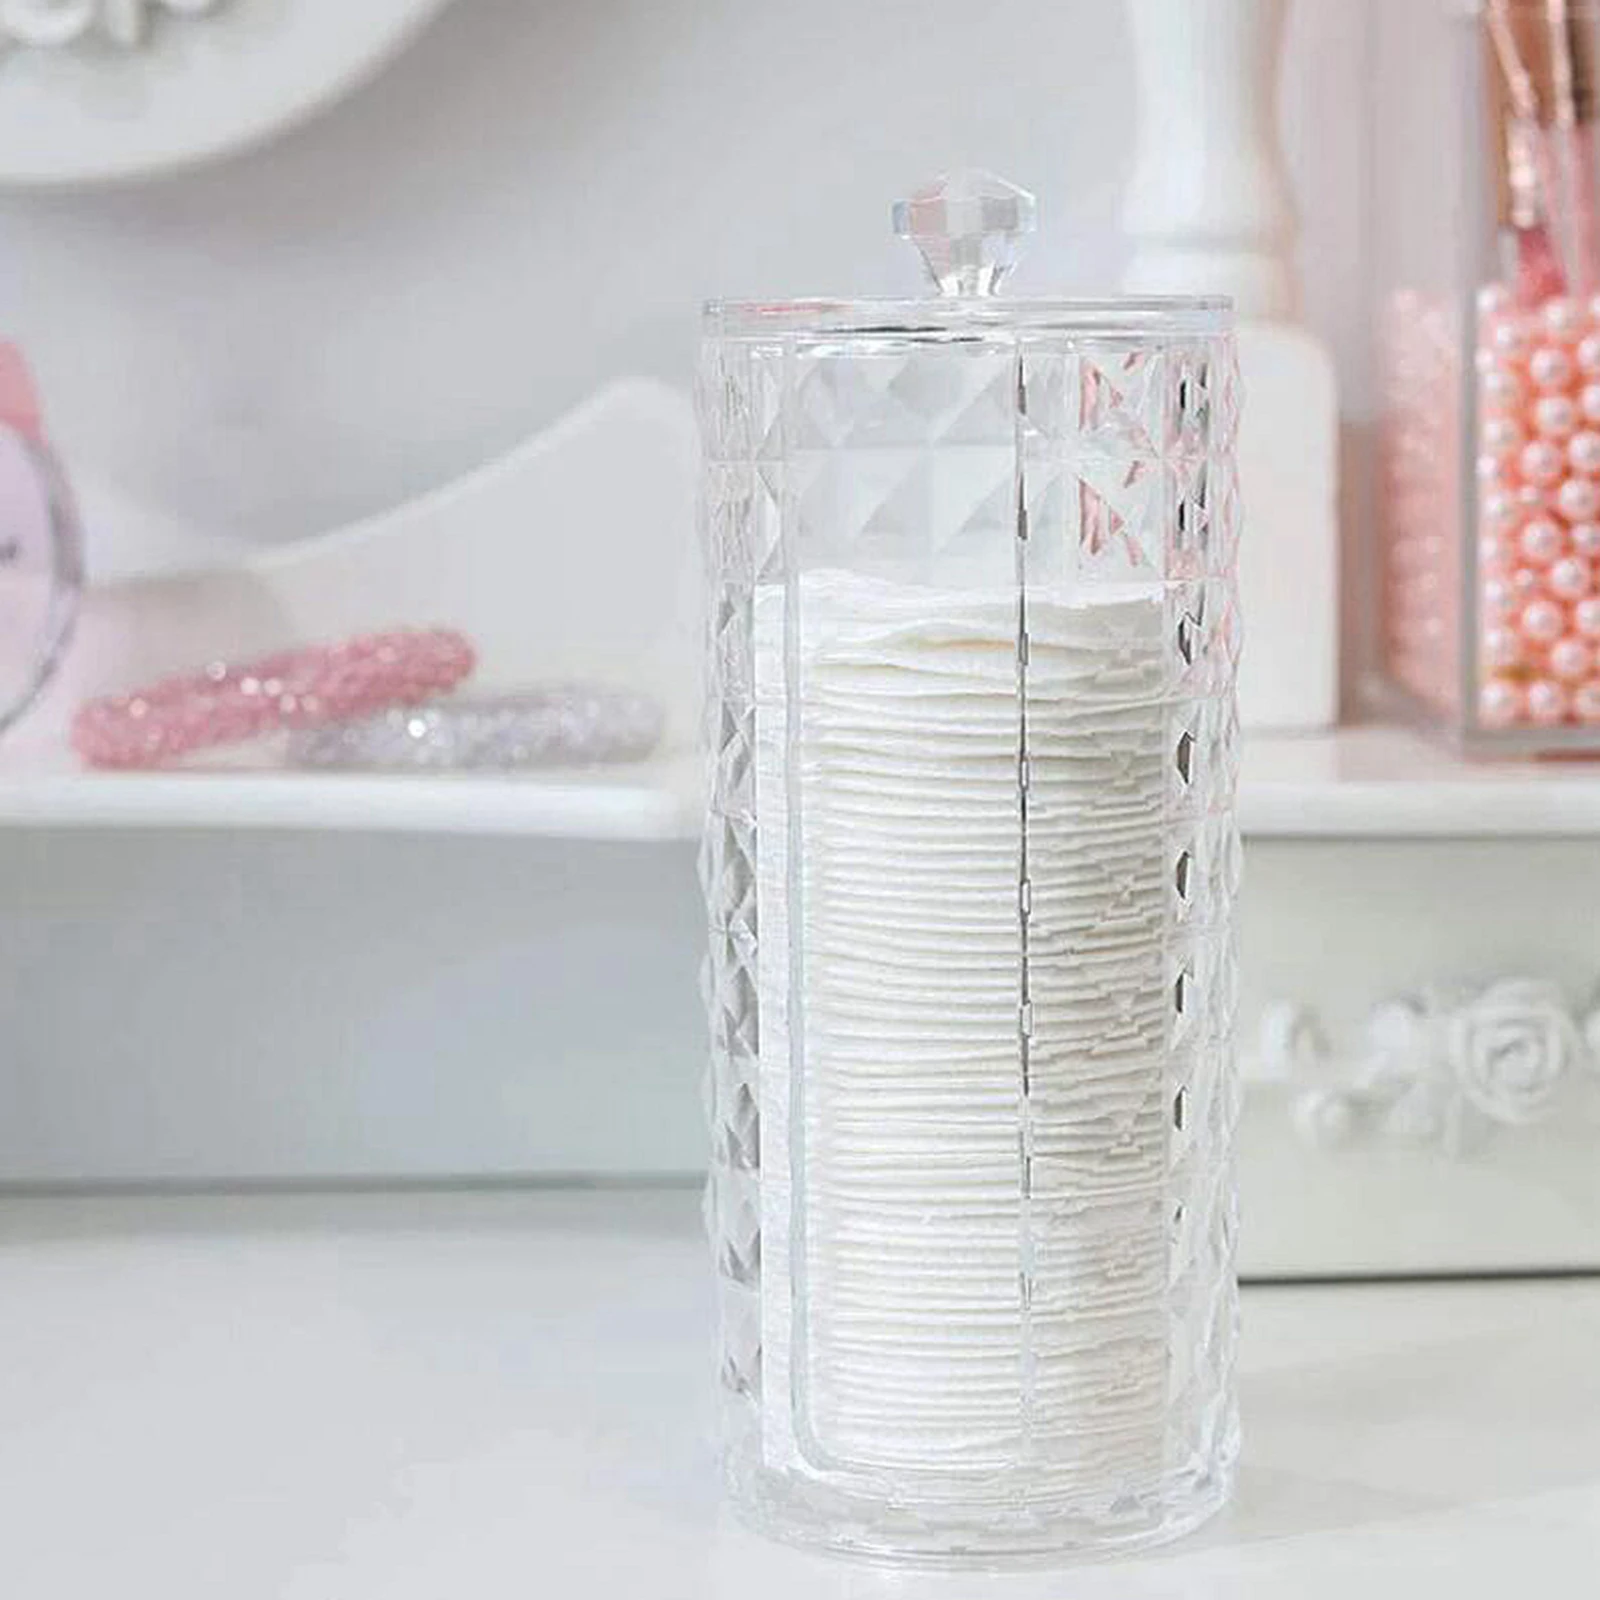 Cotton Pads Holder Organizer Clear Acrylic Make-up Remover Pads Container Makeup Clear Compartments Holder Nail Art Organizer